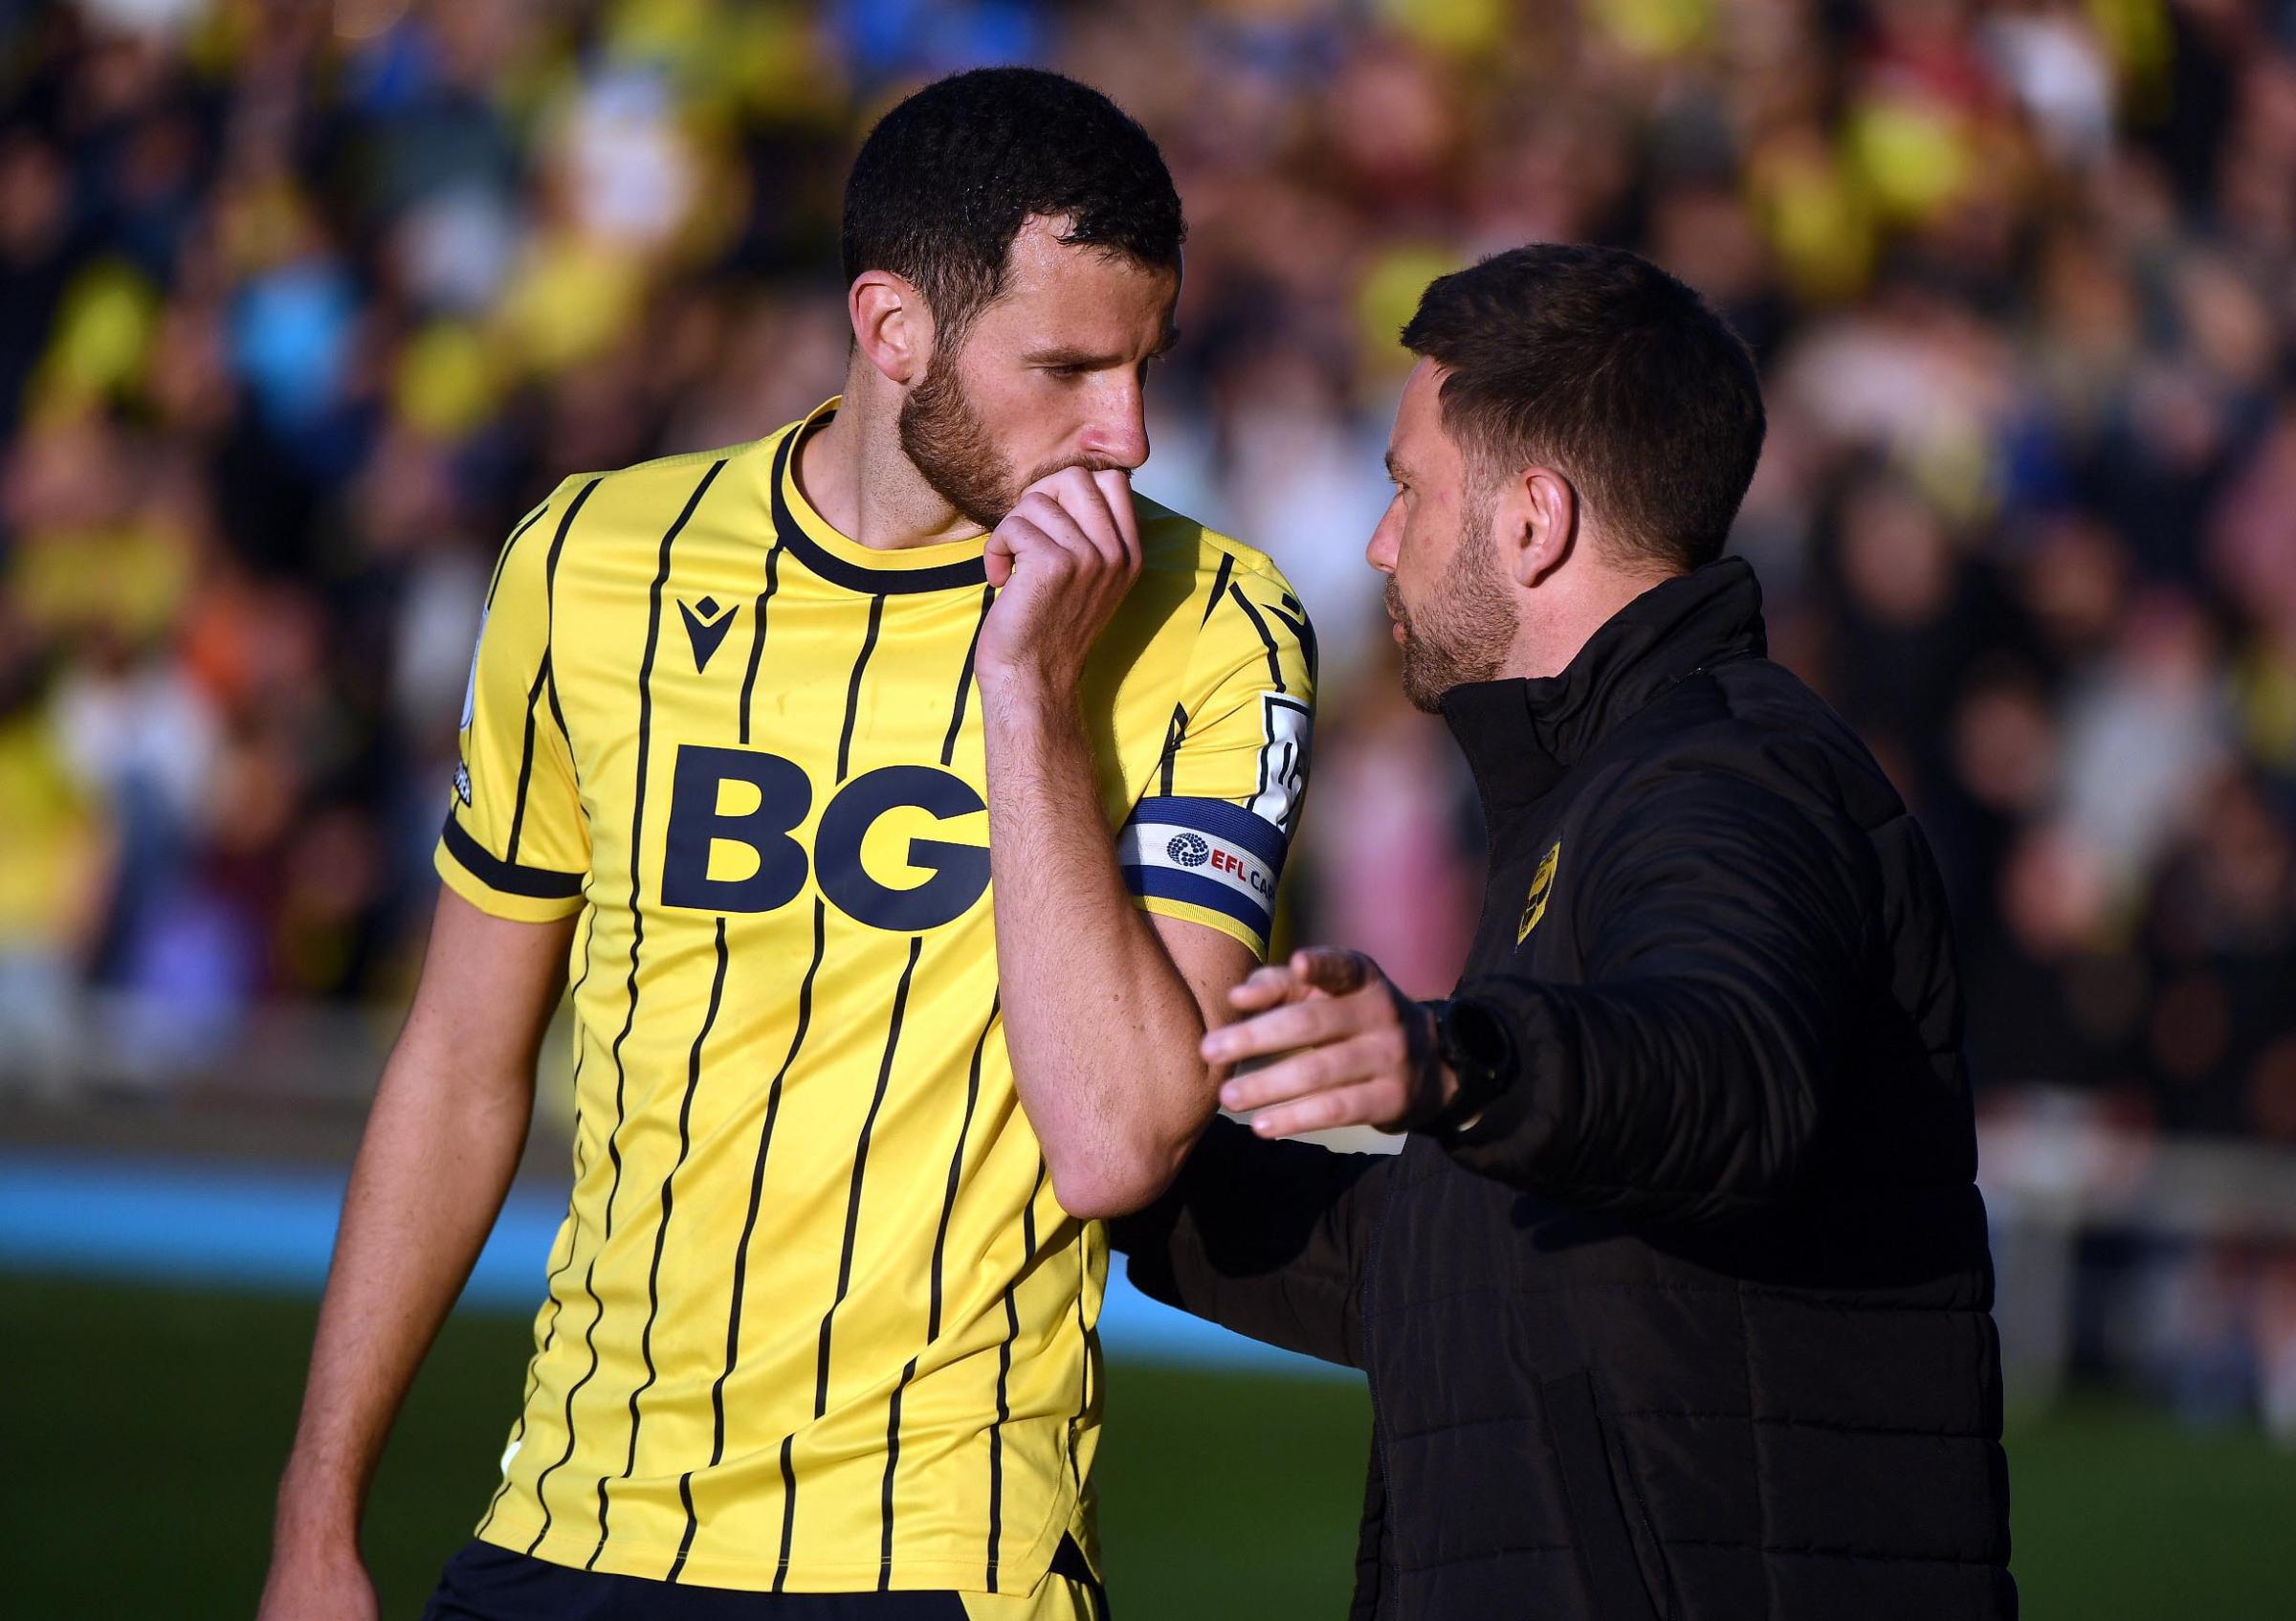 Oxford United captain says team is underdog in play-off final